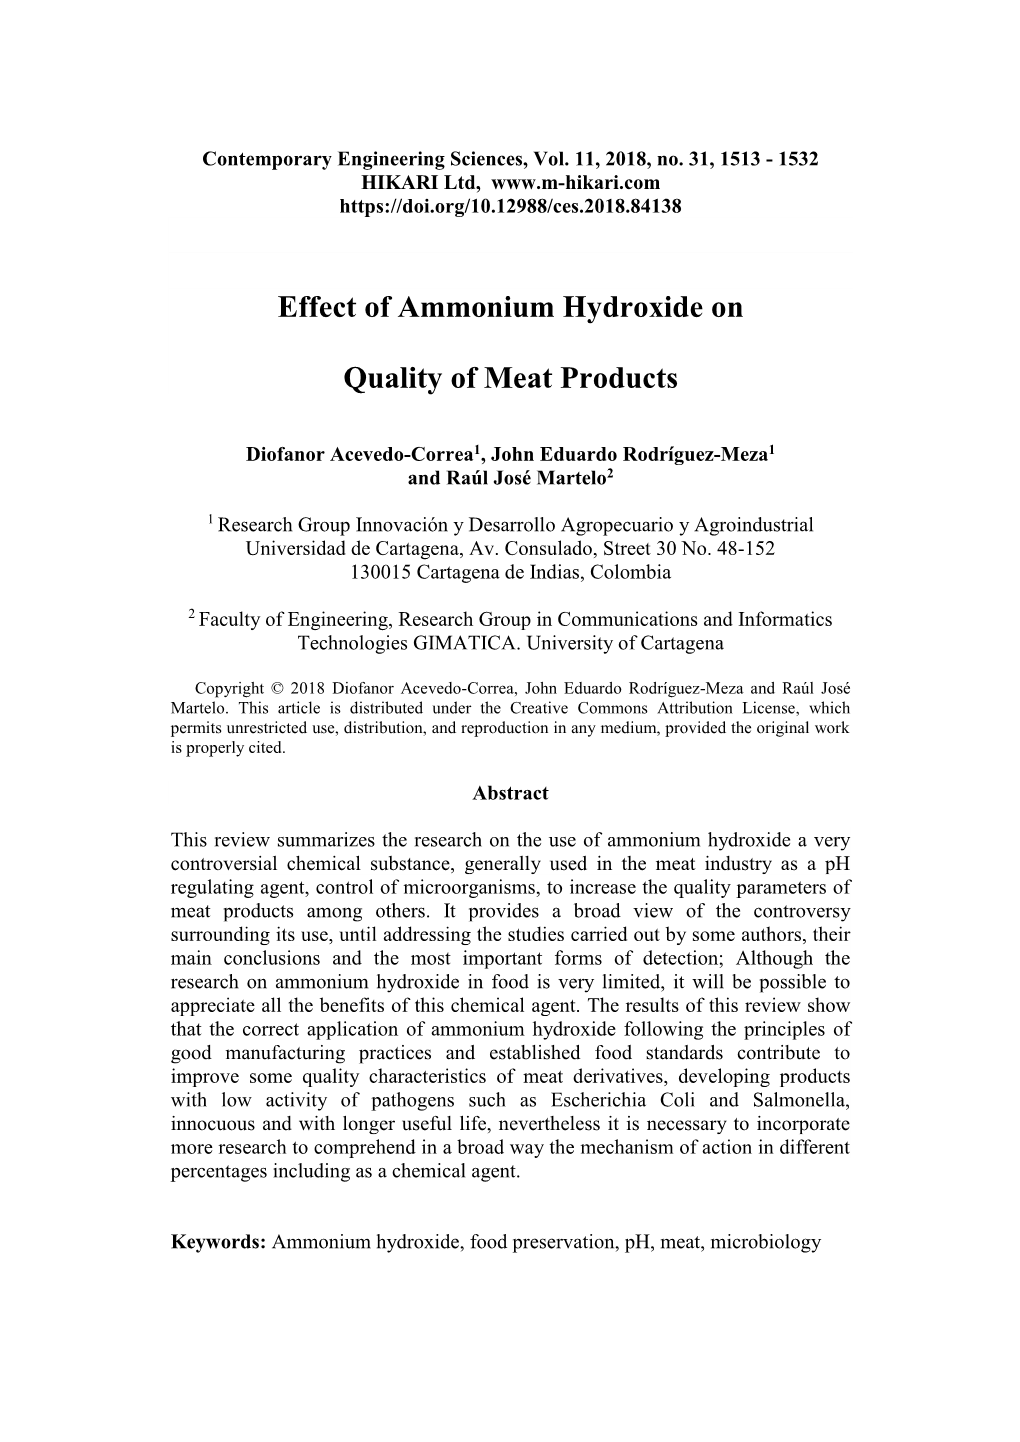 Effect of Ammonium Hydroxide on Quality of Meat Products 1515